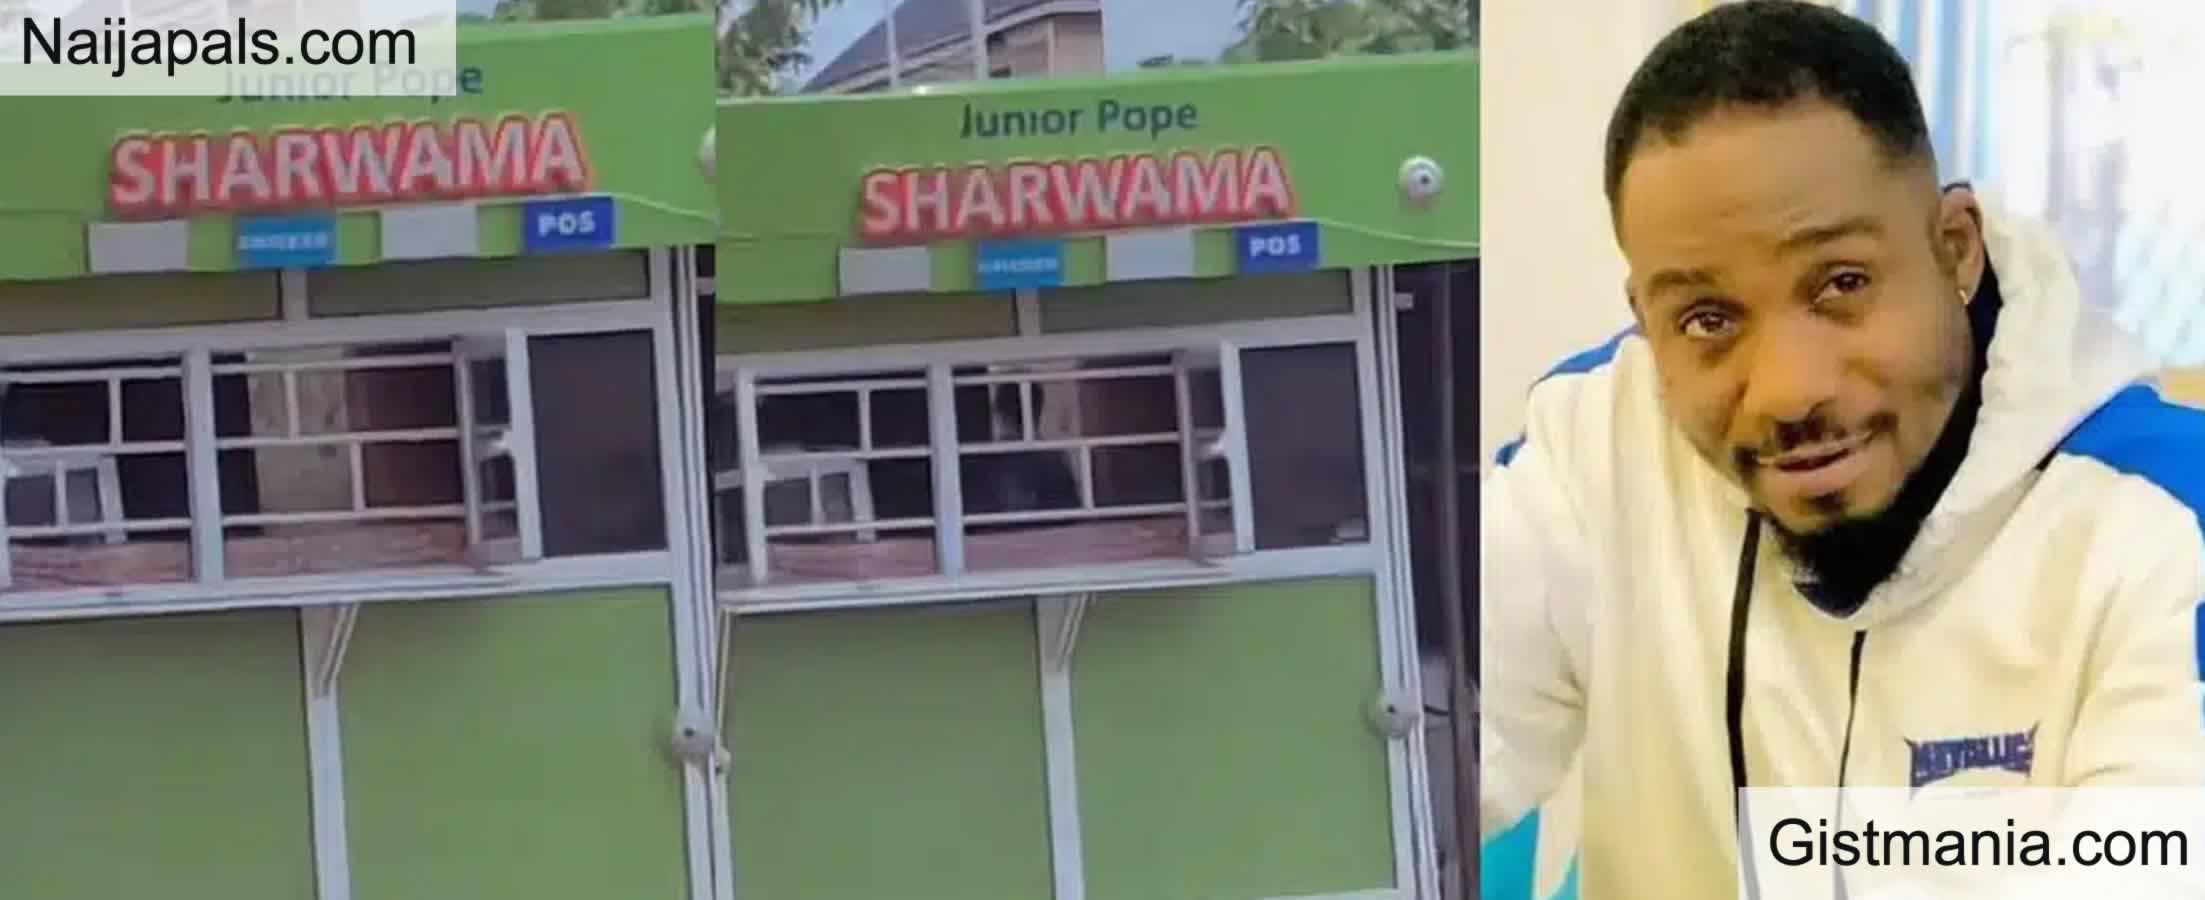 VIDEO: Outrage As Owerri Citizen Opens Junior Pope Shawarma Stand